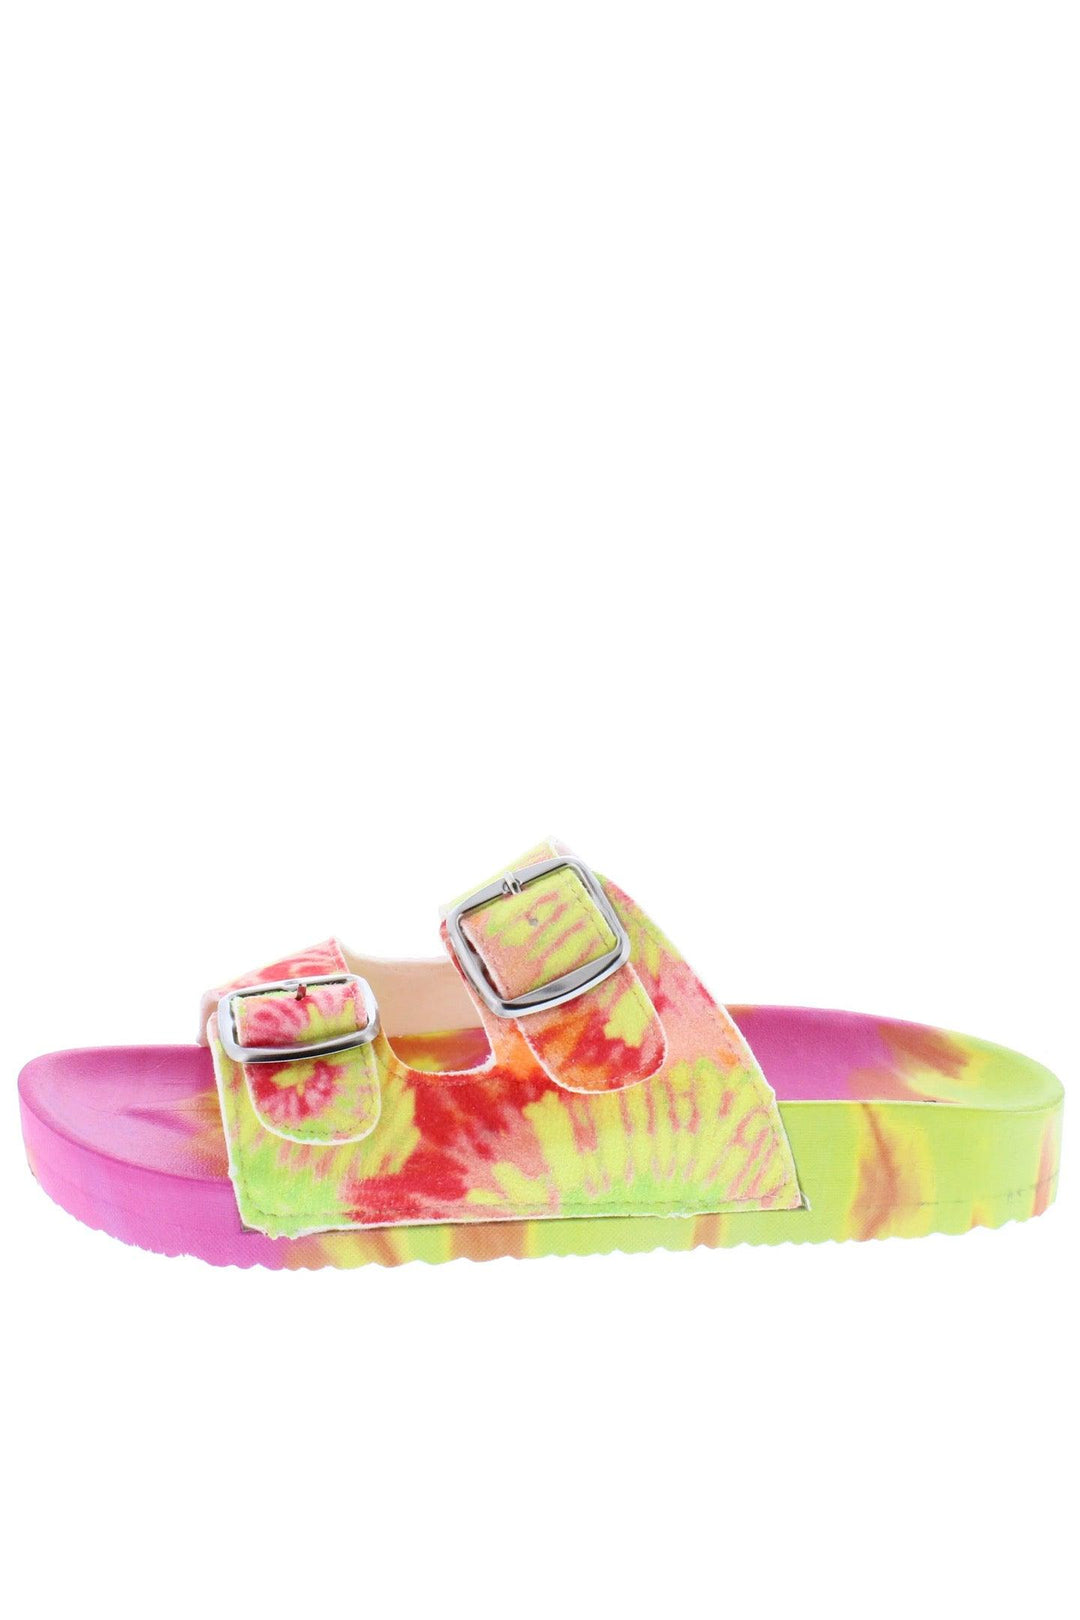 Dual Knotted Tie Dye Sandal - Size 7